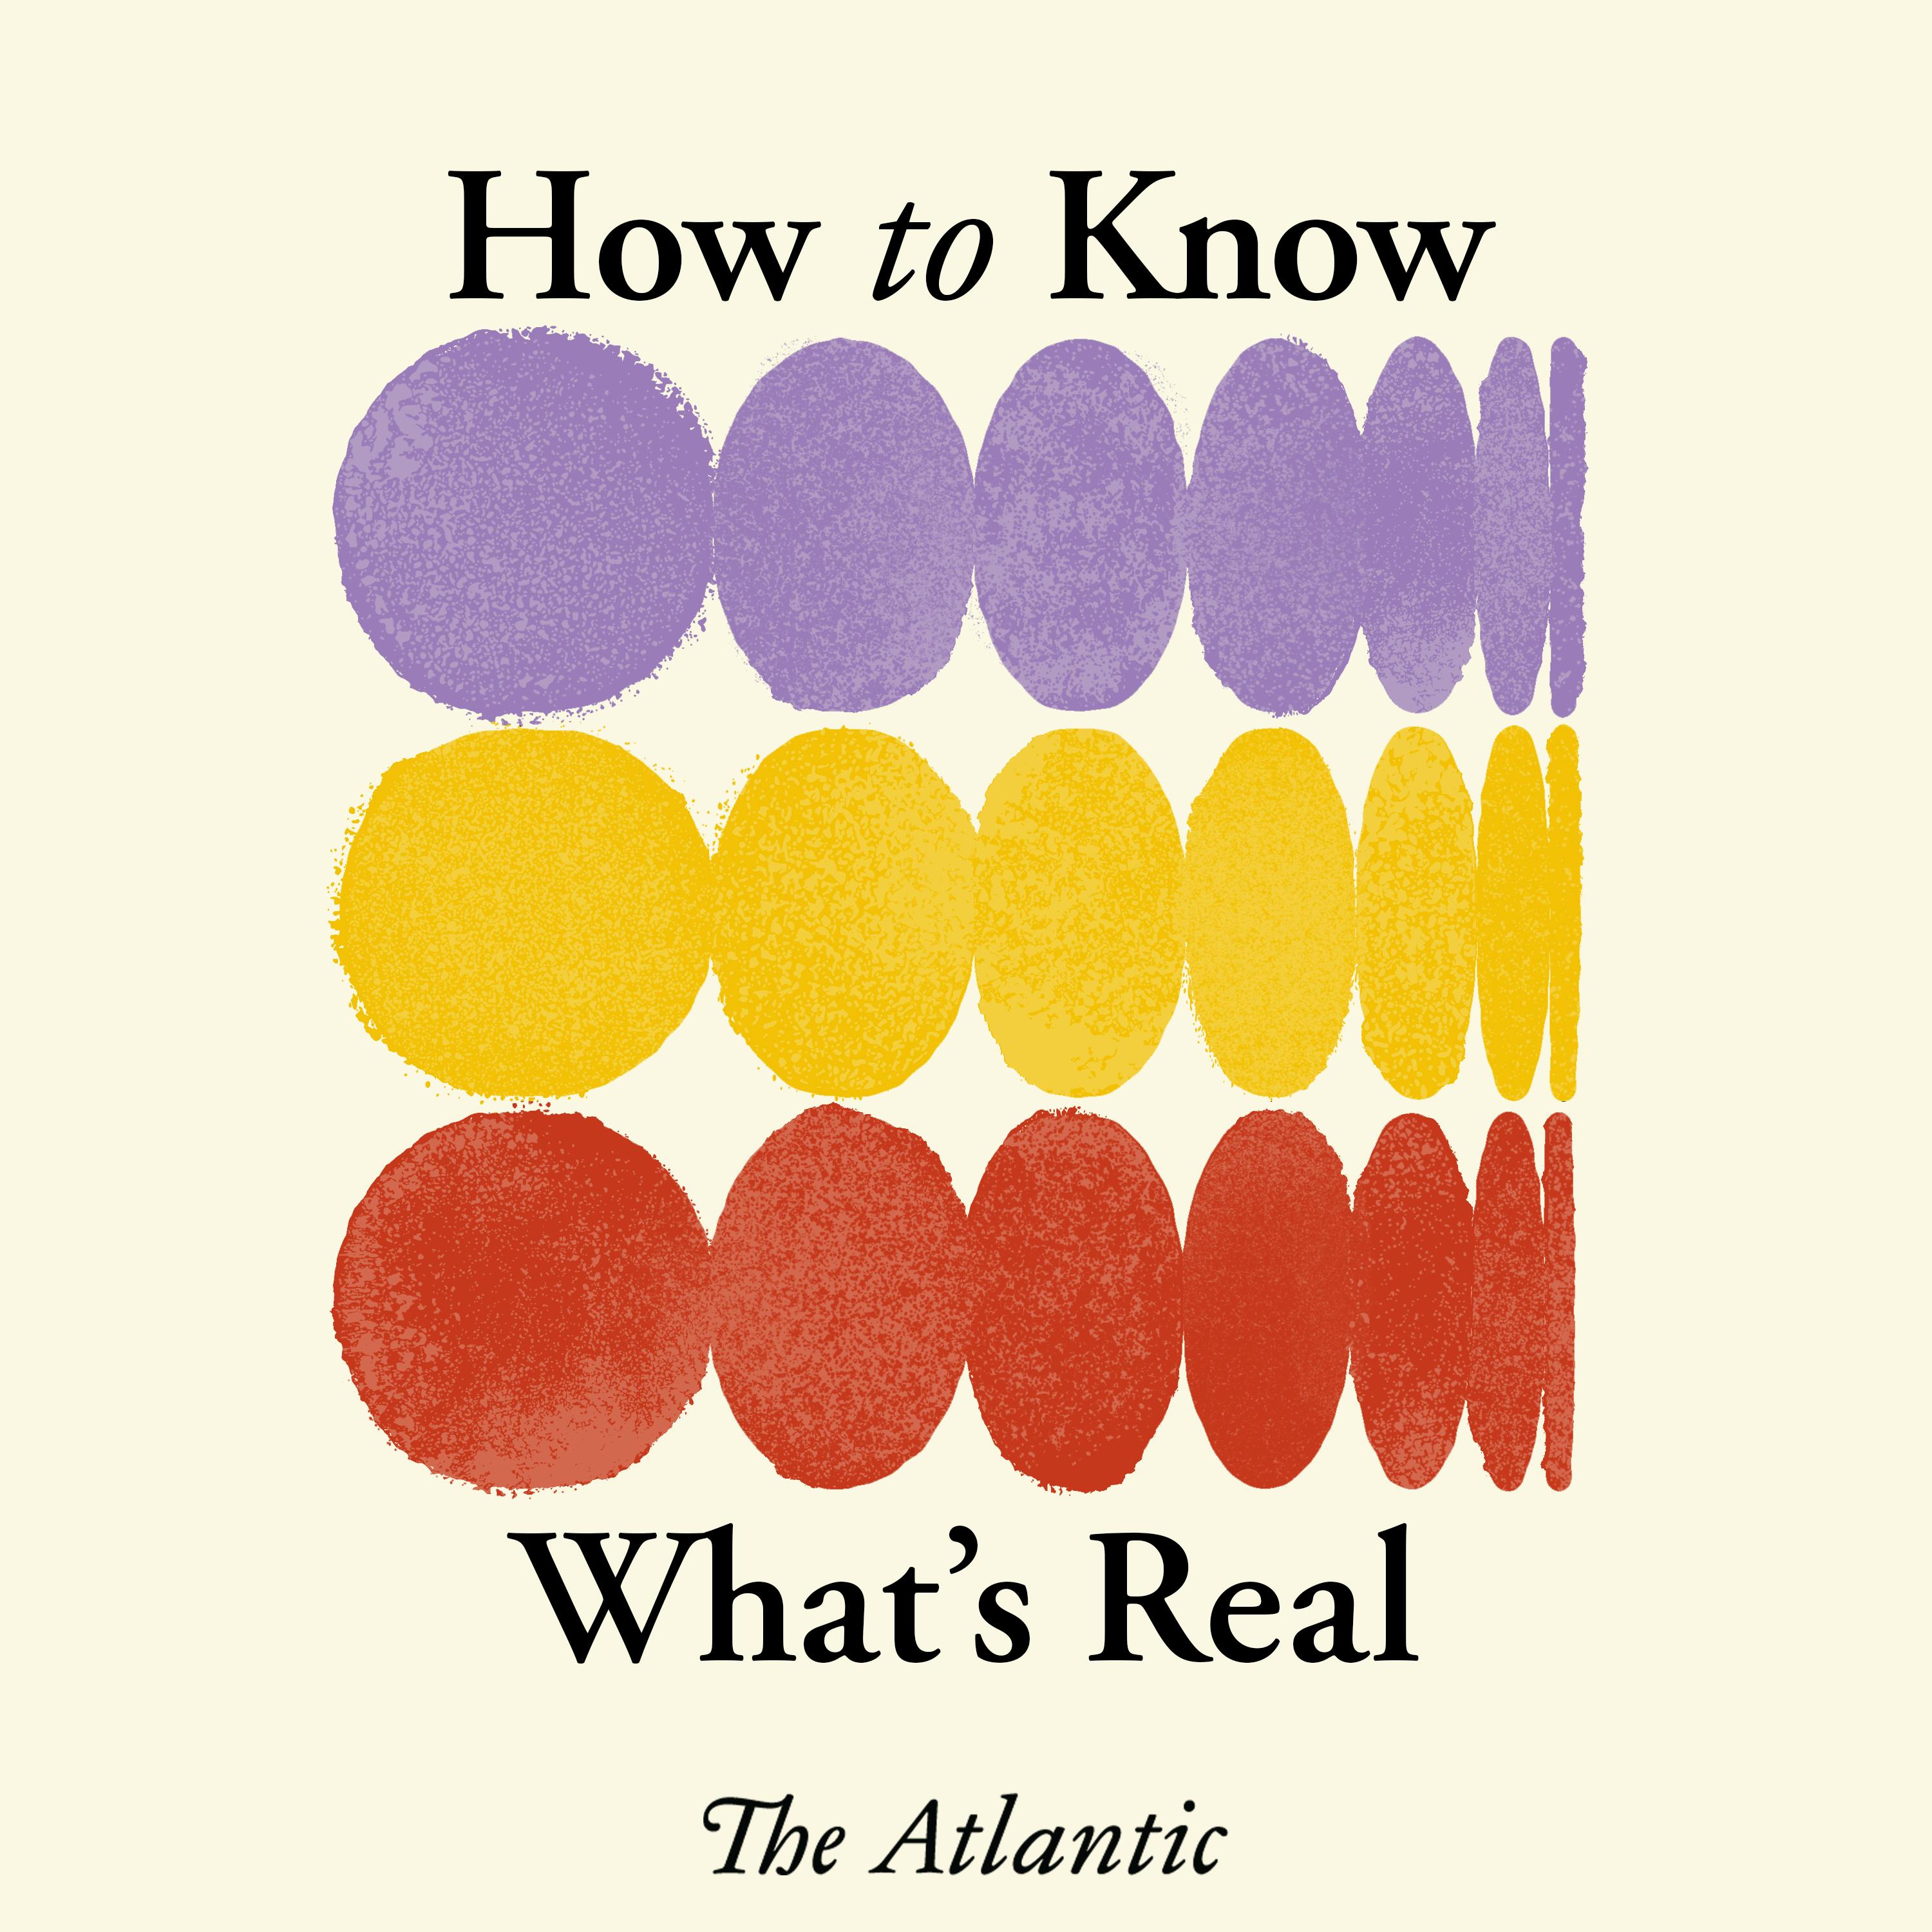 How to Know What's Real